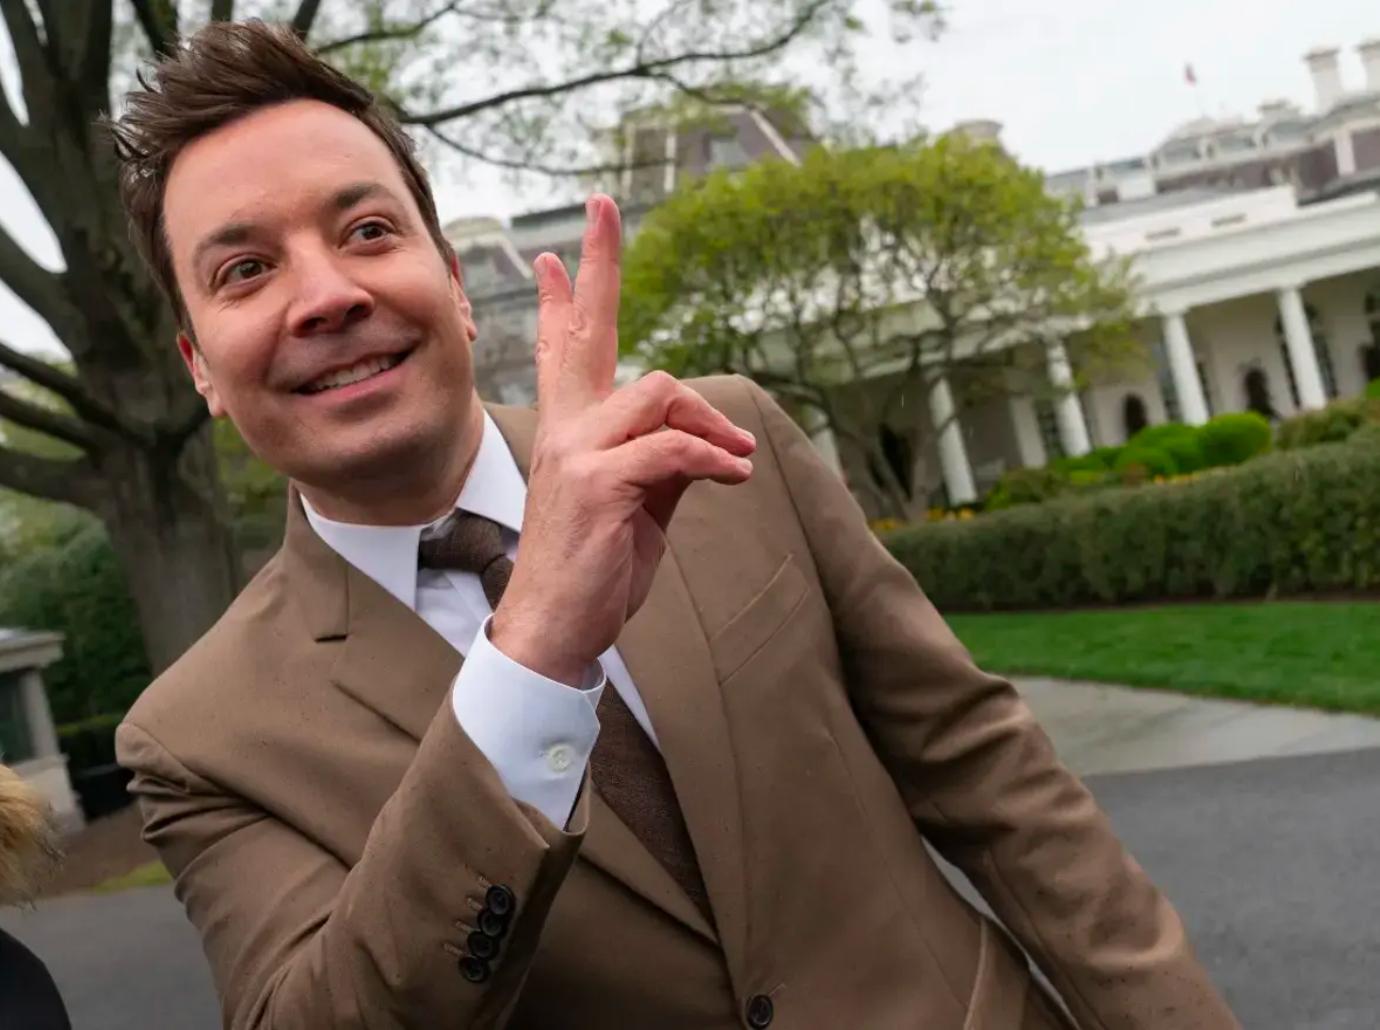 Jimmy Fallon's net worth: How much does the Tonight Show host earn?